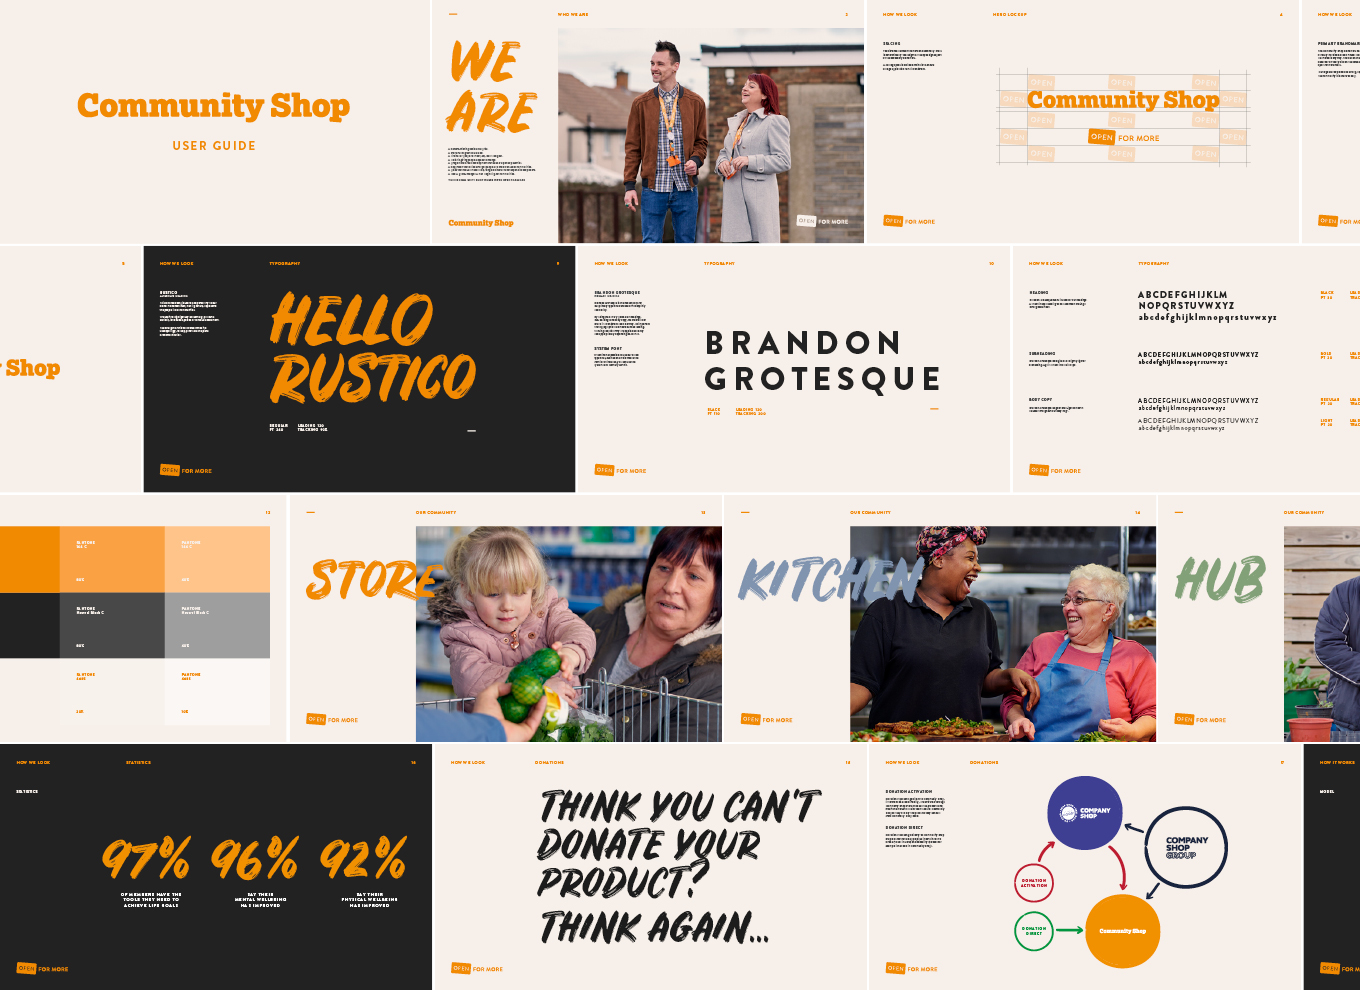 Community Shop Brand Guidelines